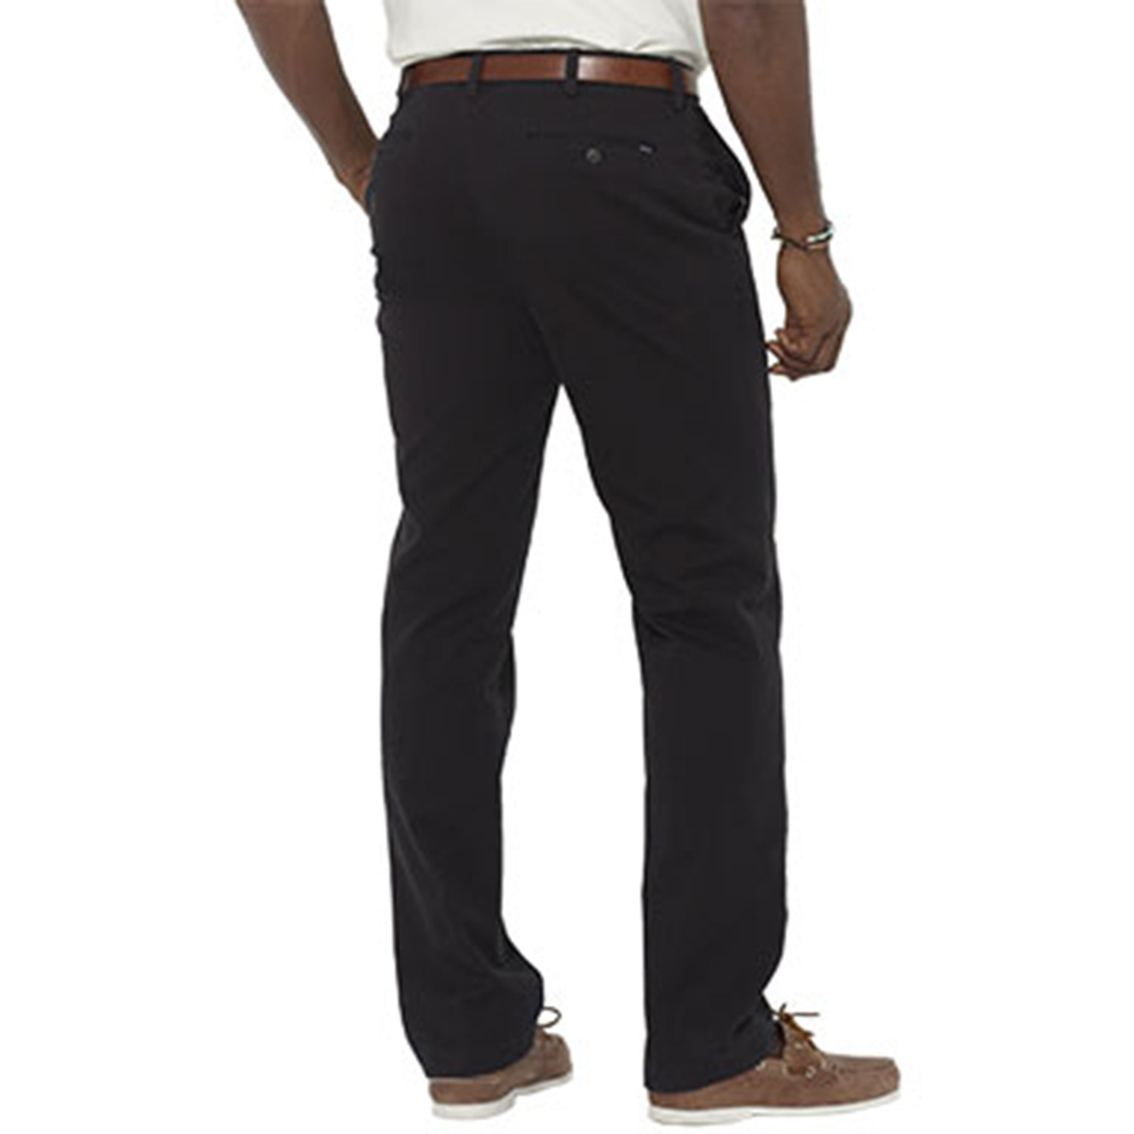 Polo Ralph Lauren Classic Fit Flat Front Chino Pants - Image 2 of 2